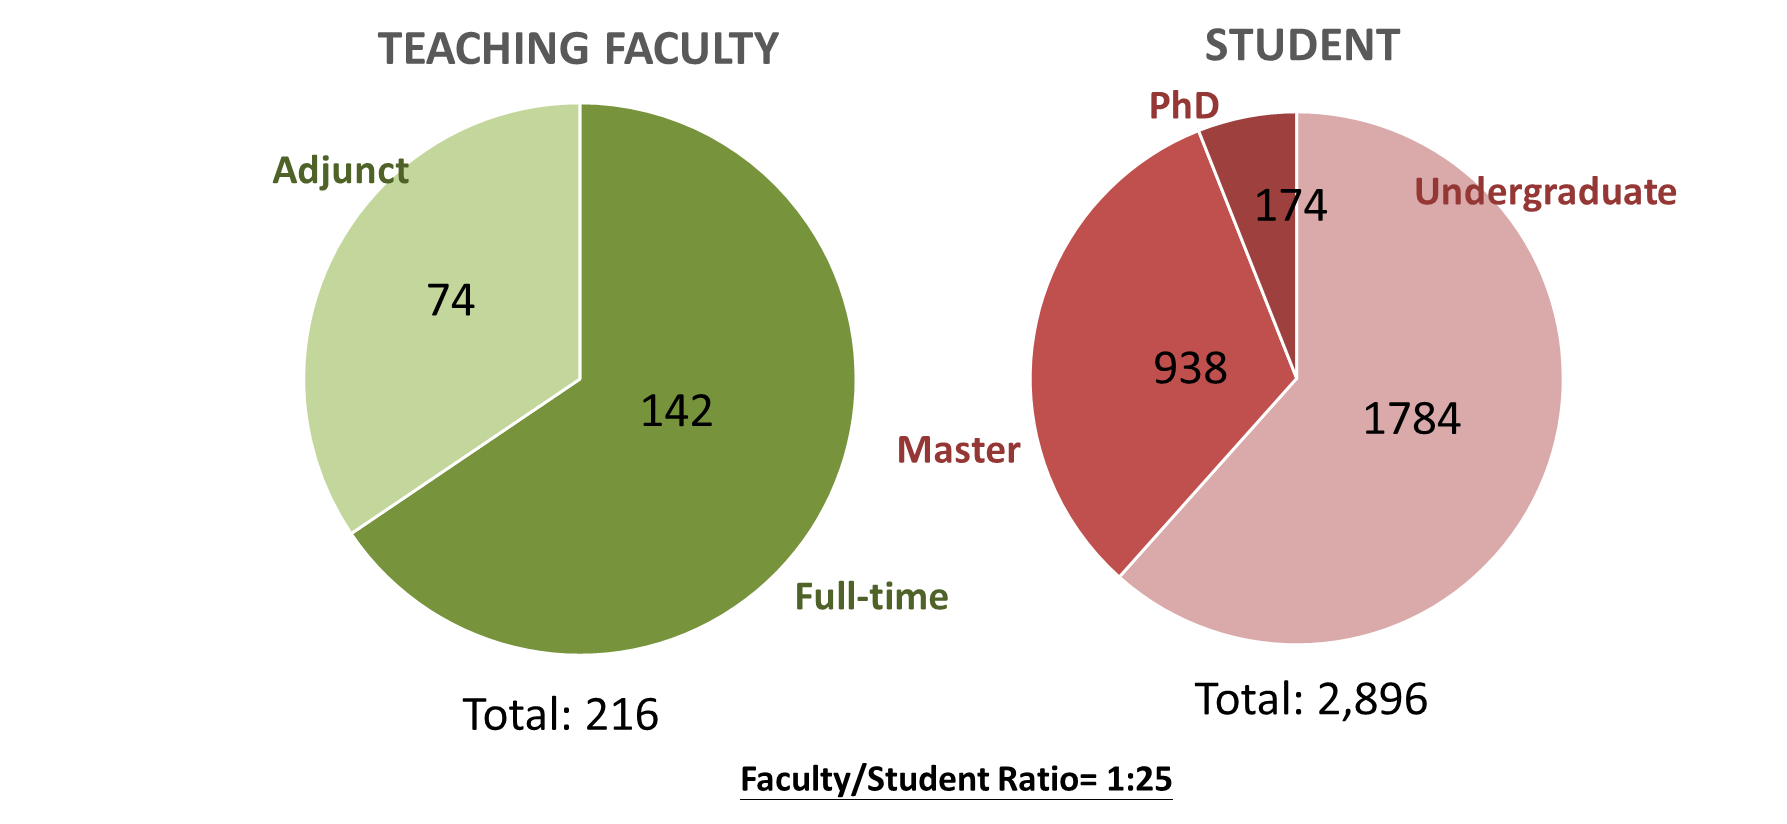 number of faculty and student